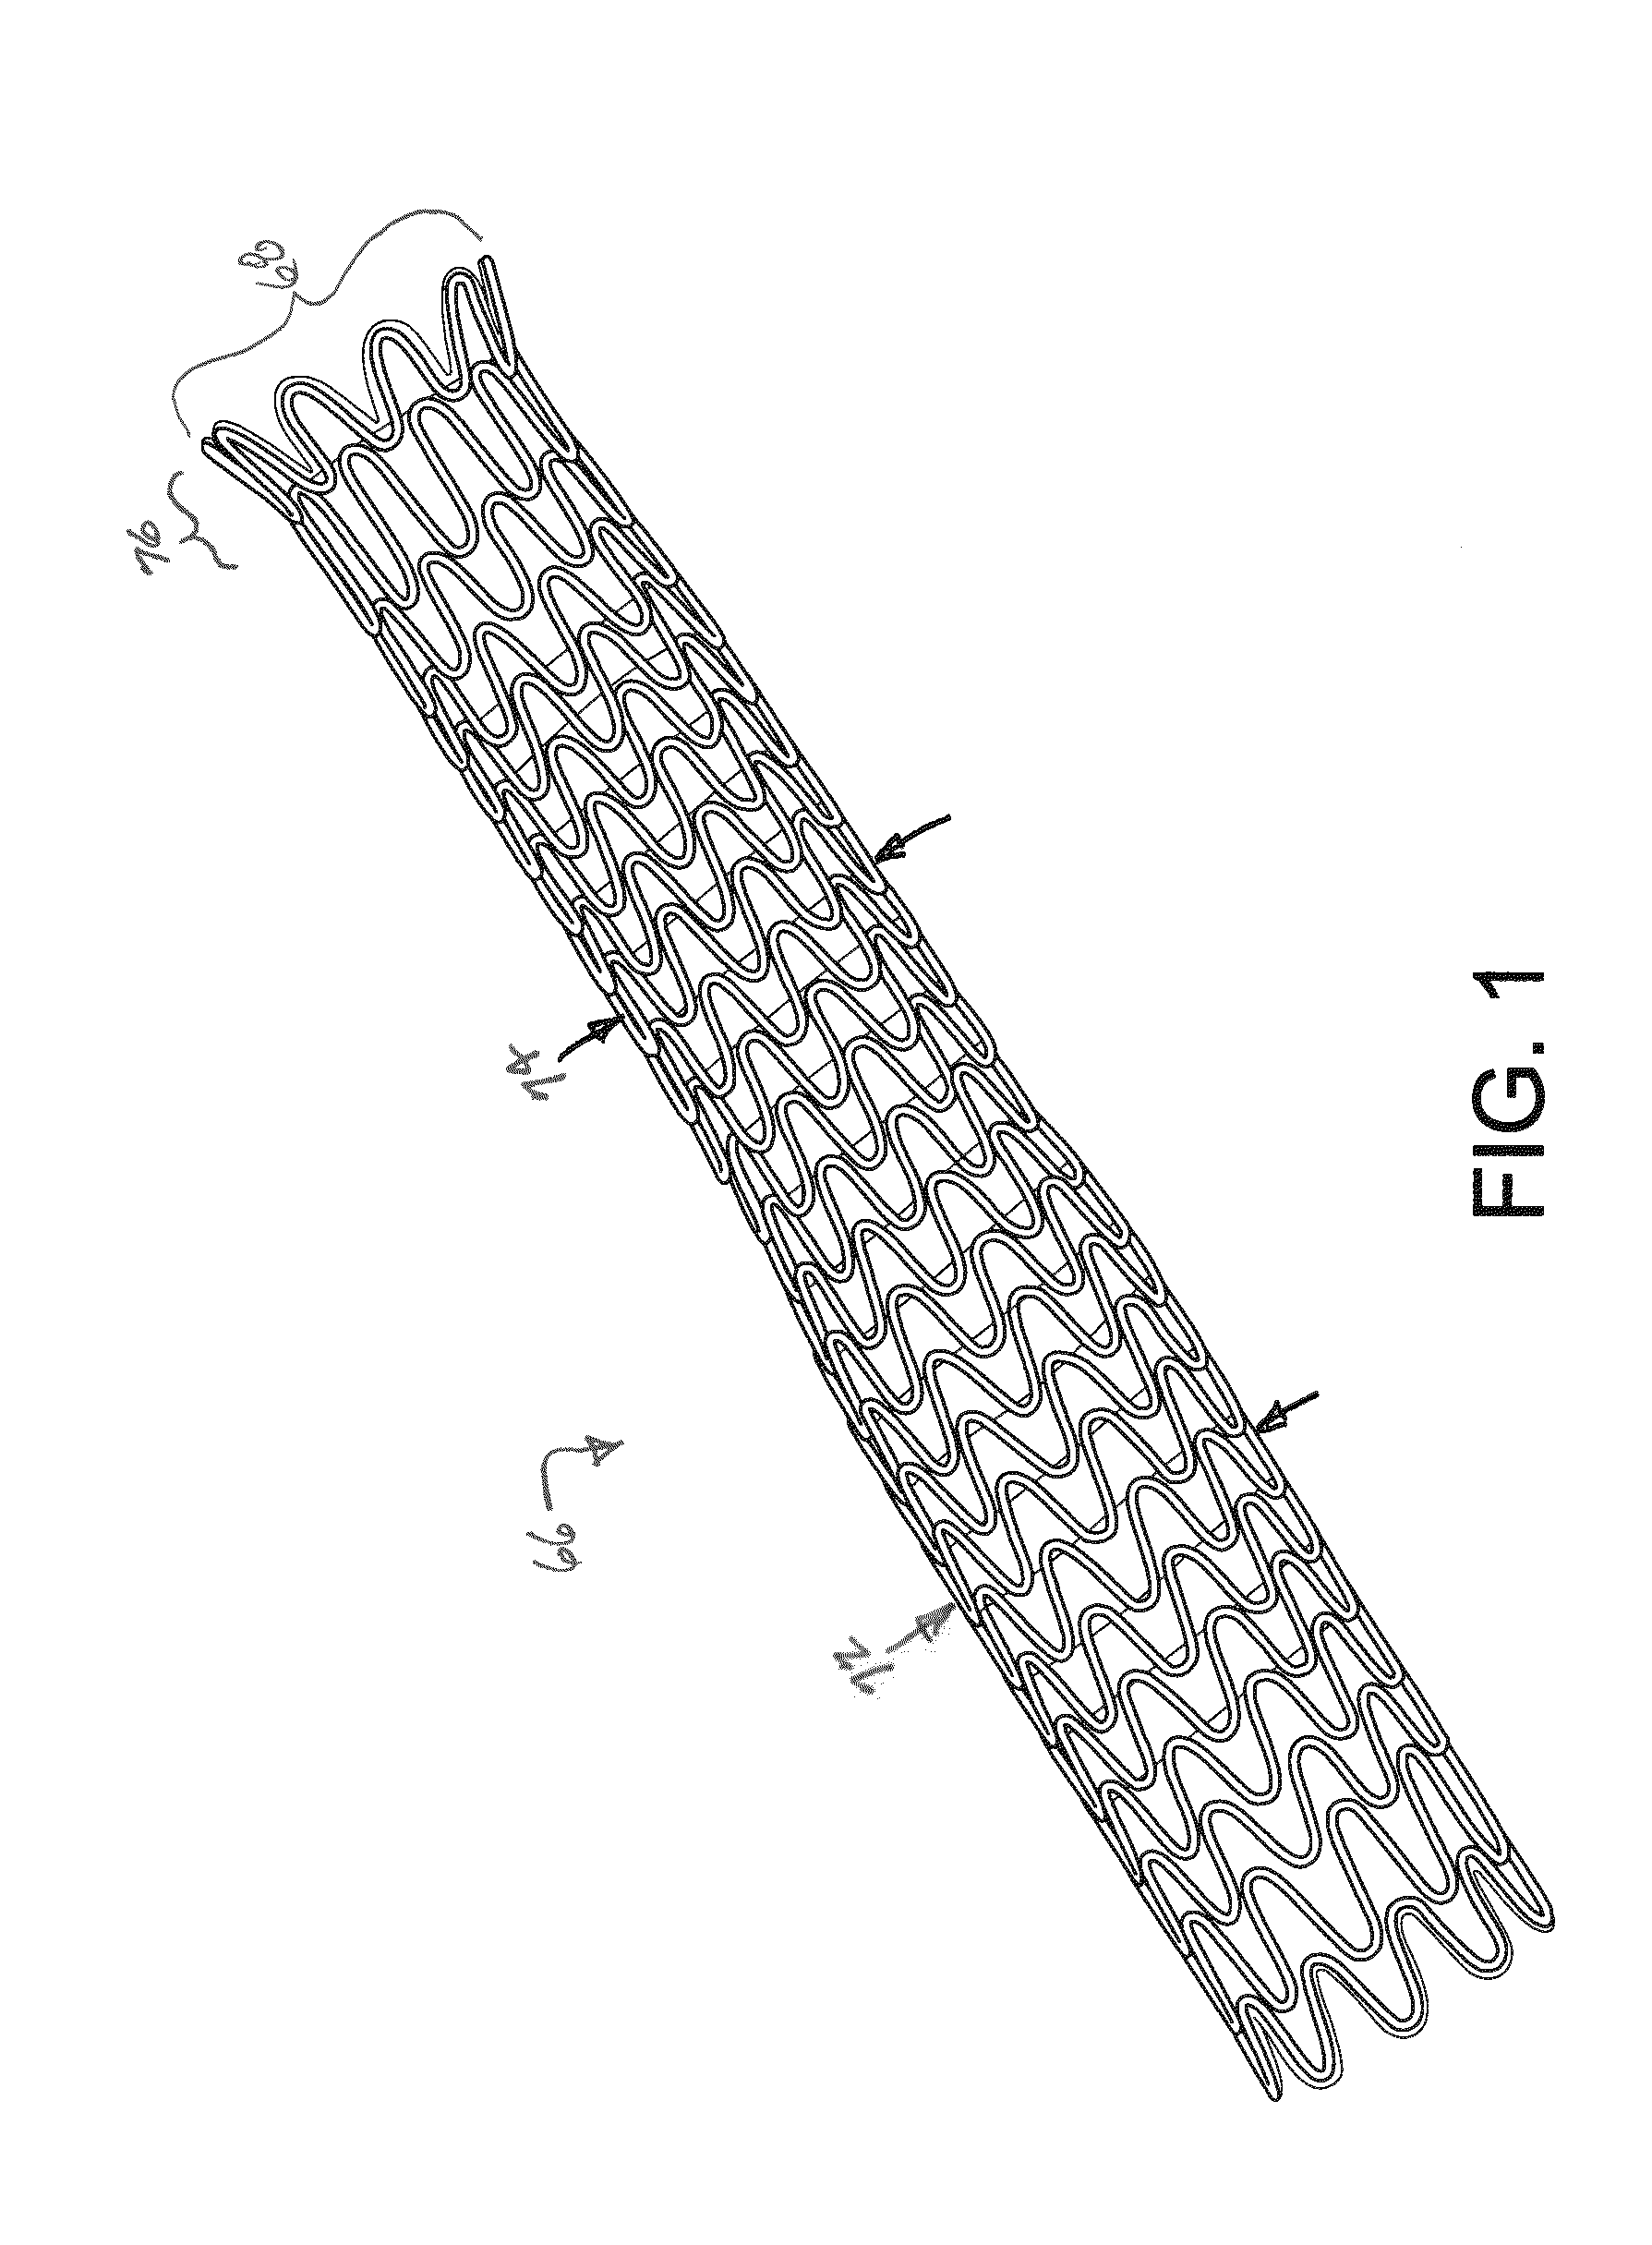 Self-expanding, balloon expandable stent-grafts